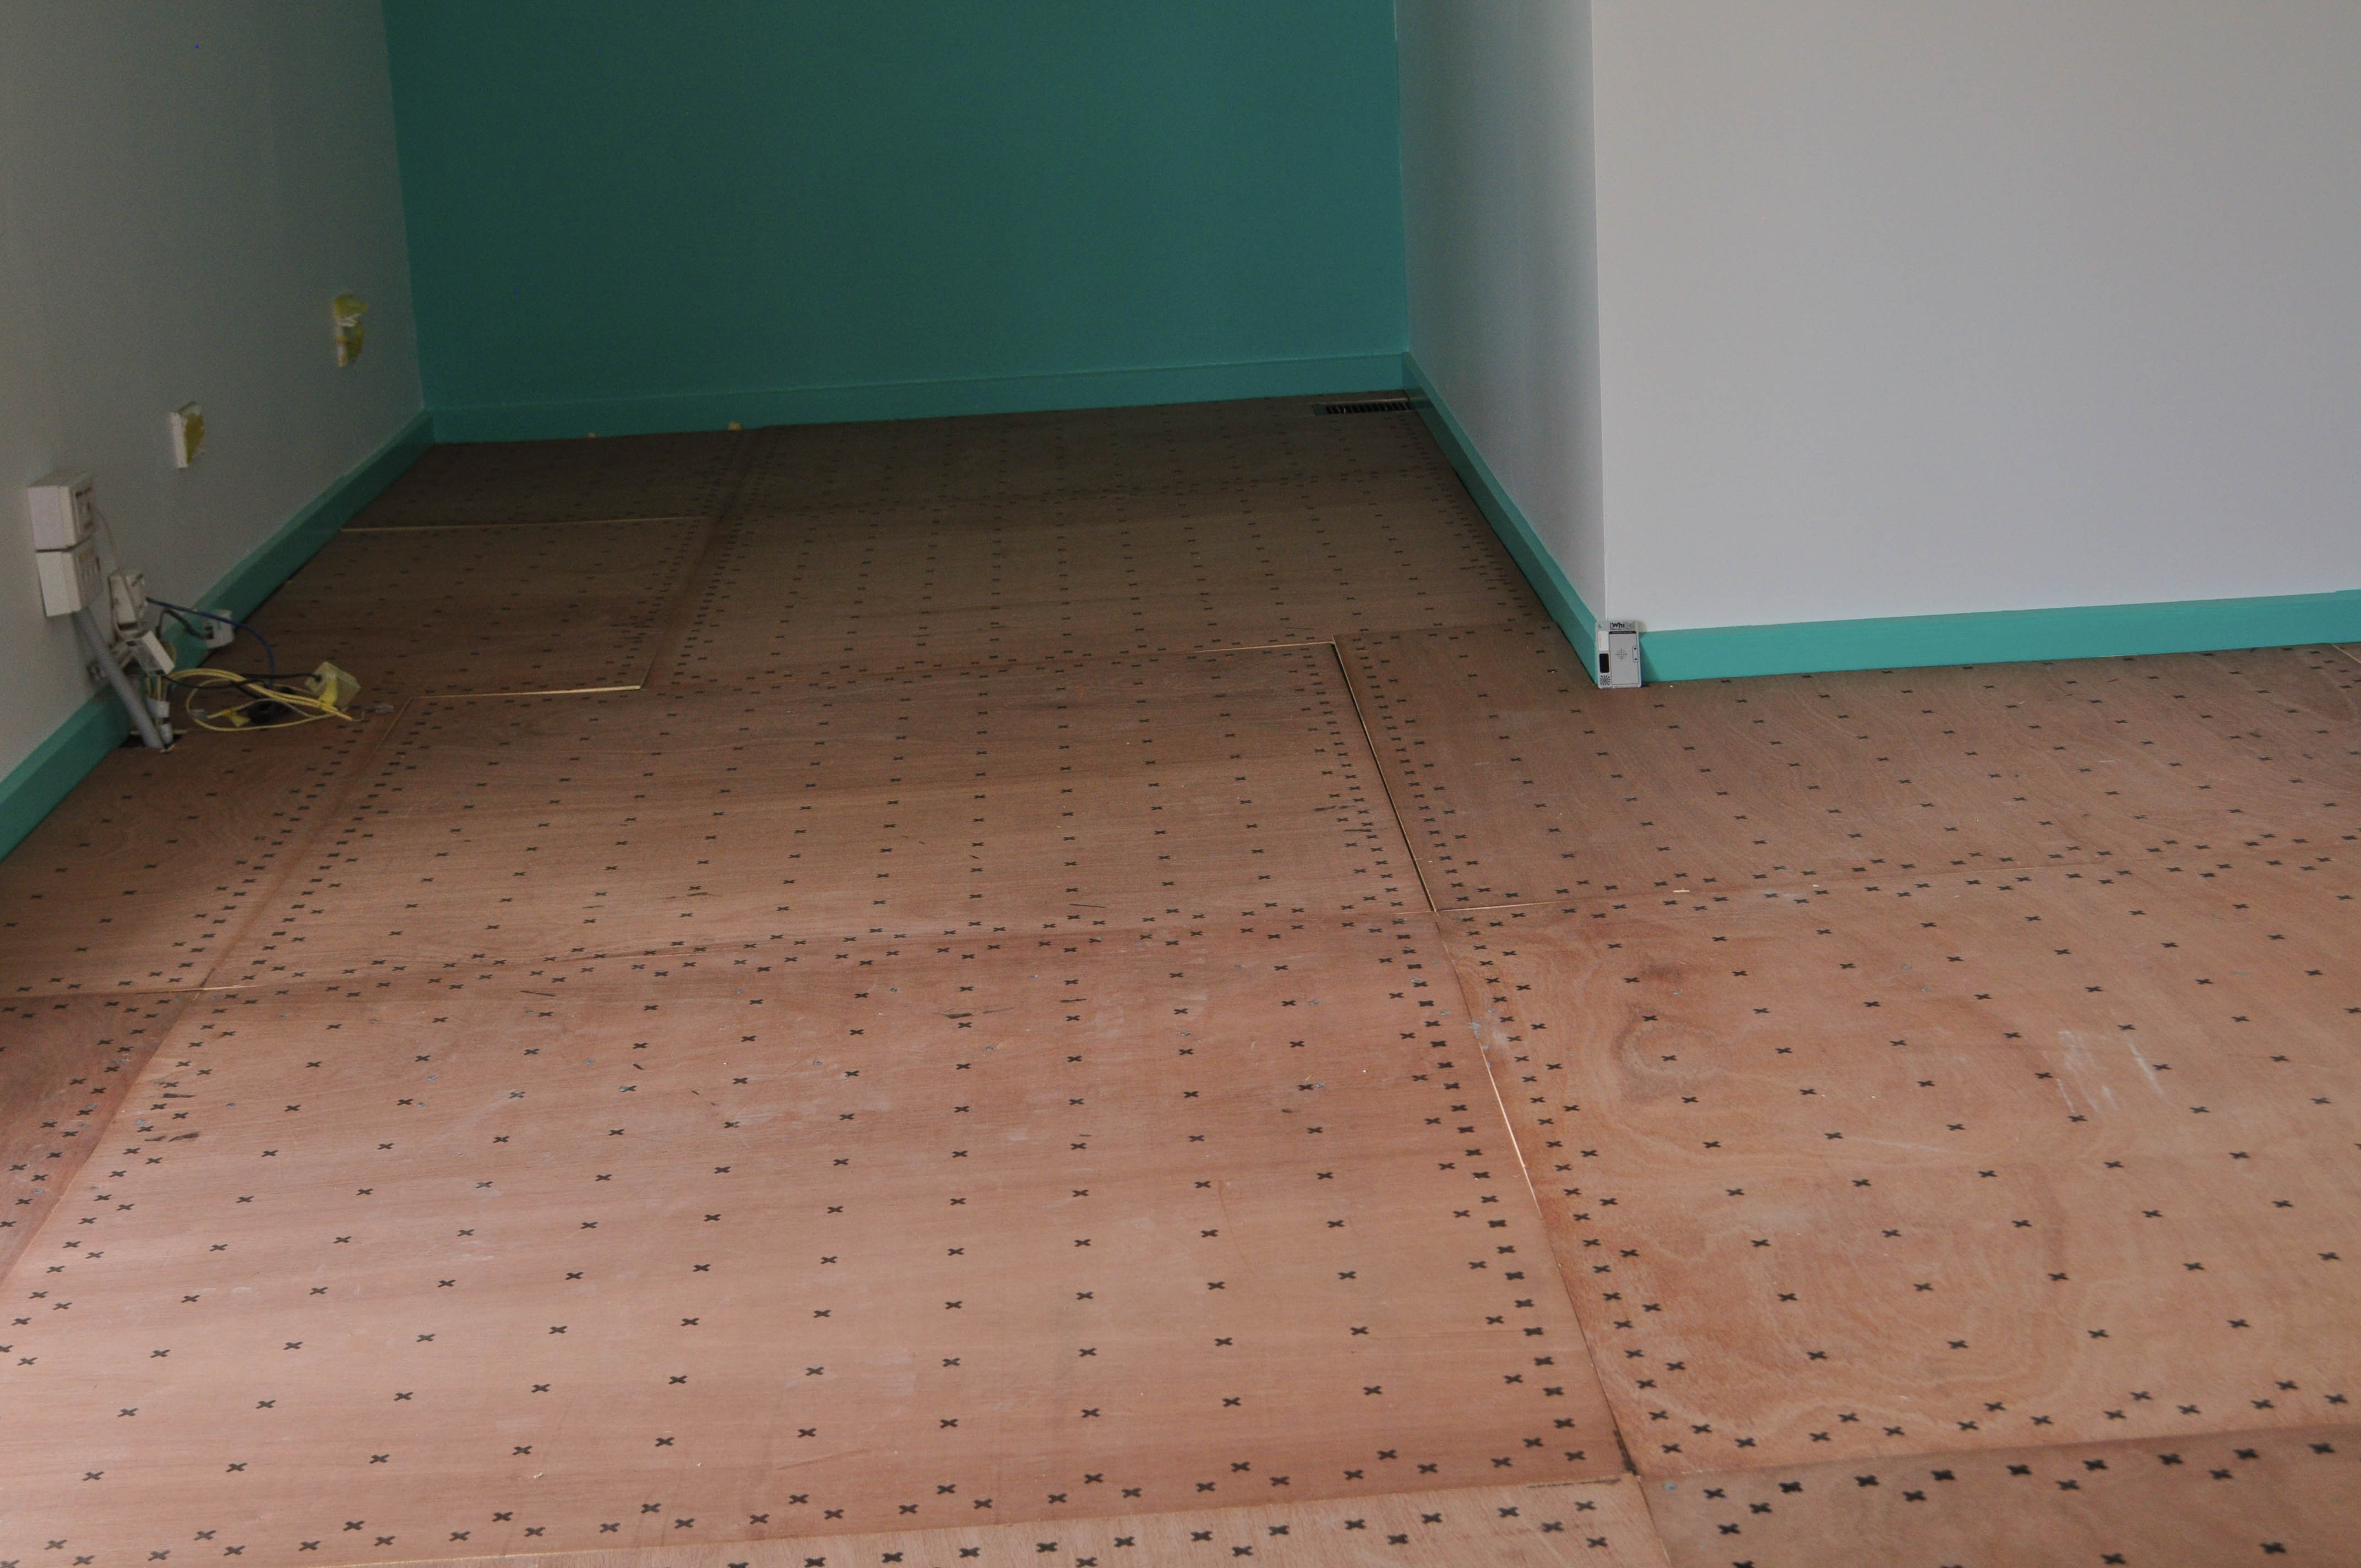 patterned, deep avender colored, carpet tile sample of the Jalan range sold and installed by Concord Floors.